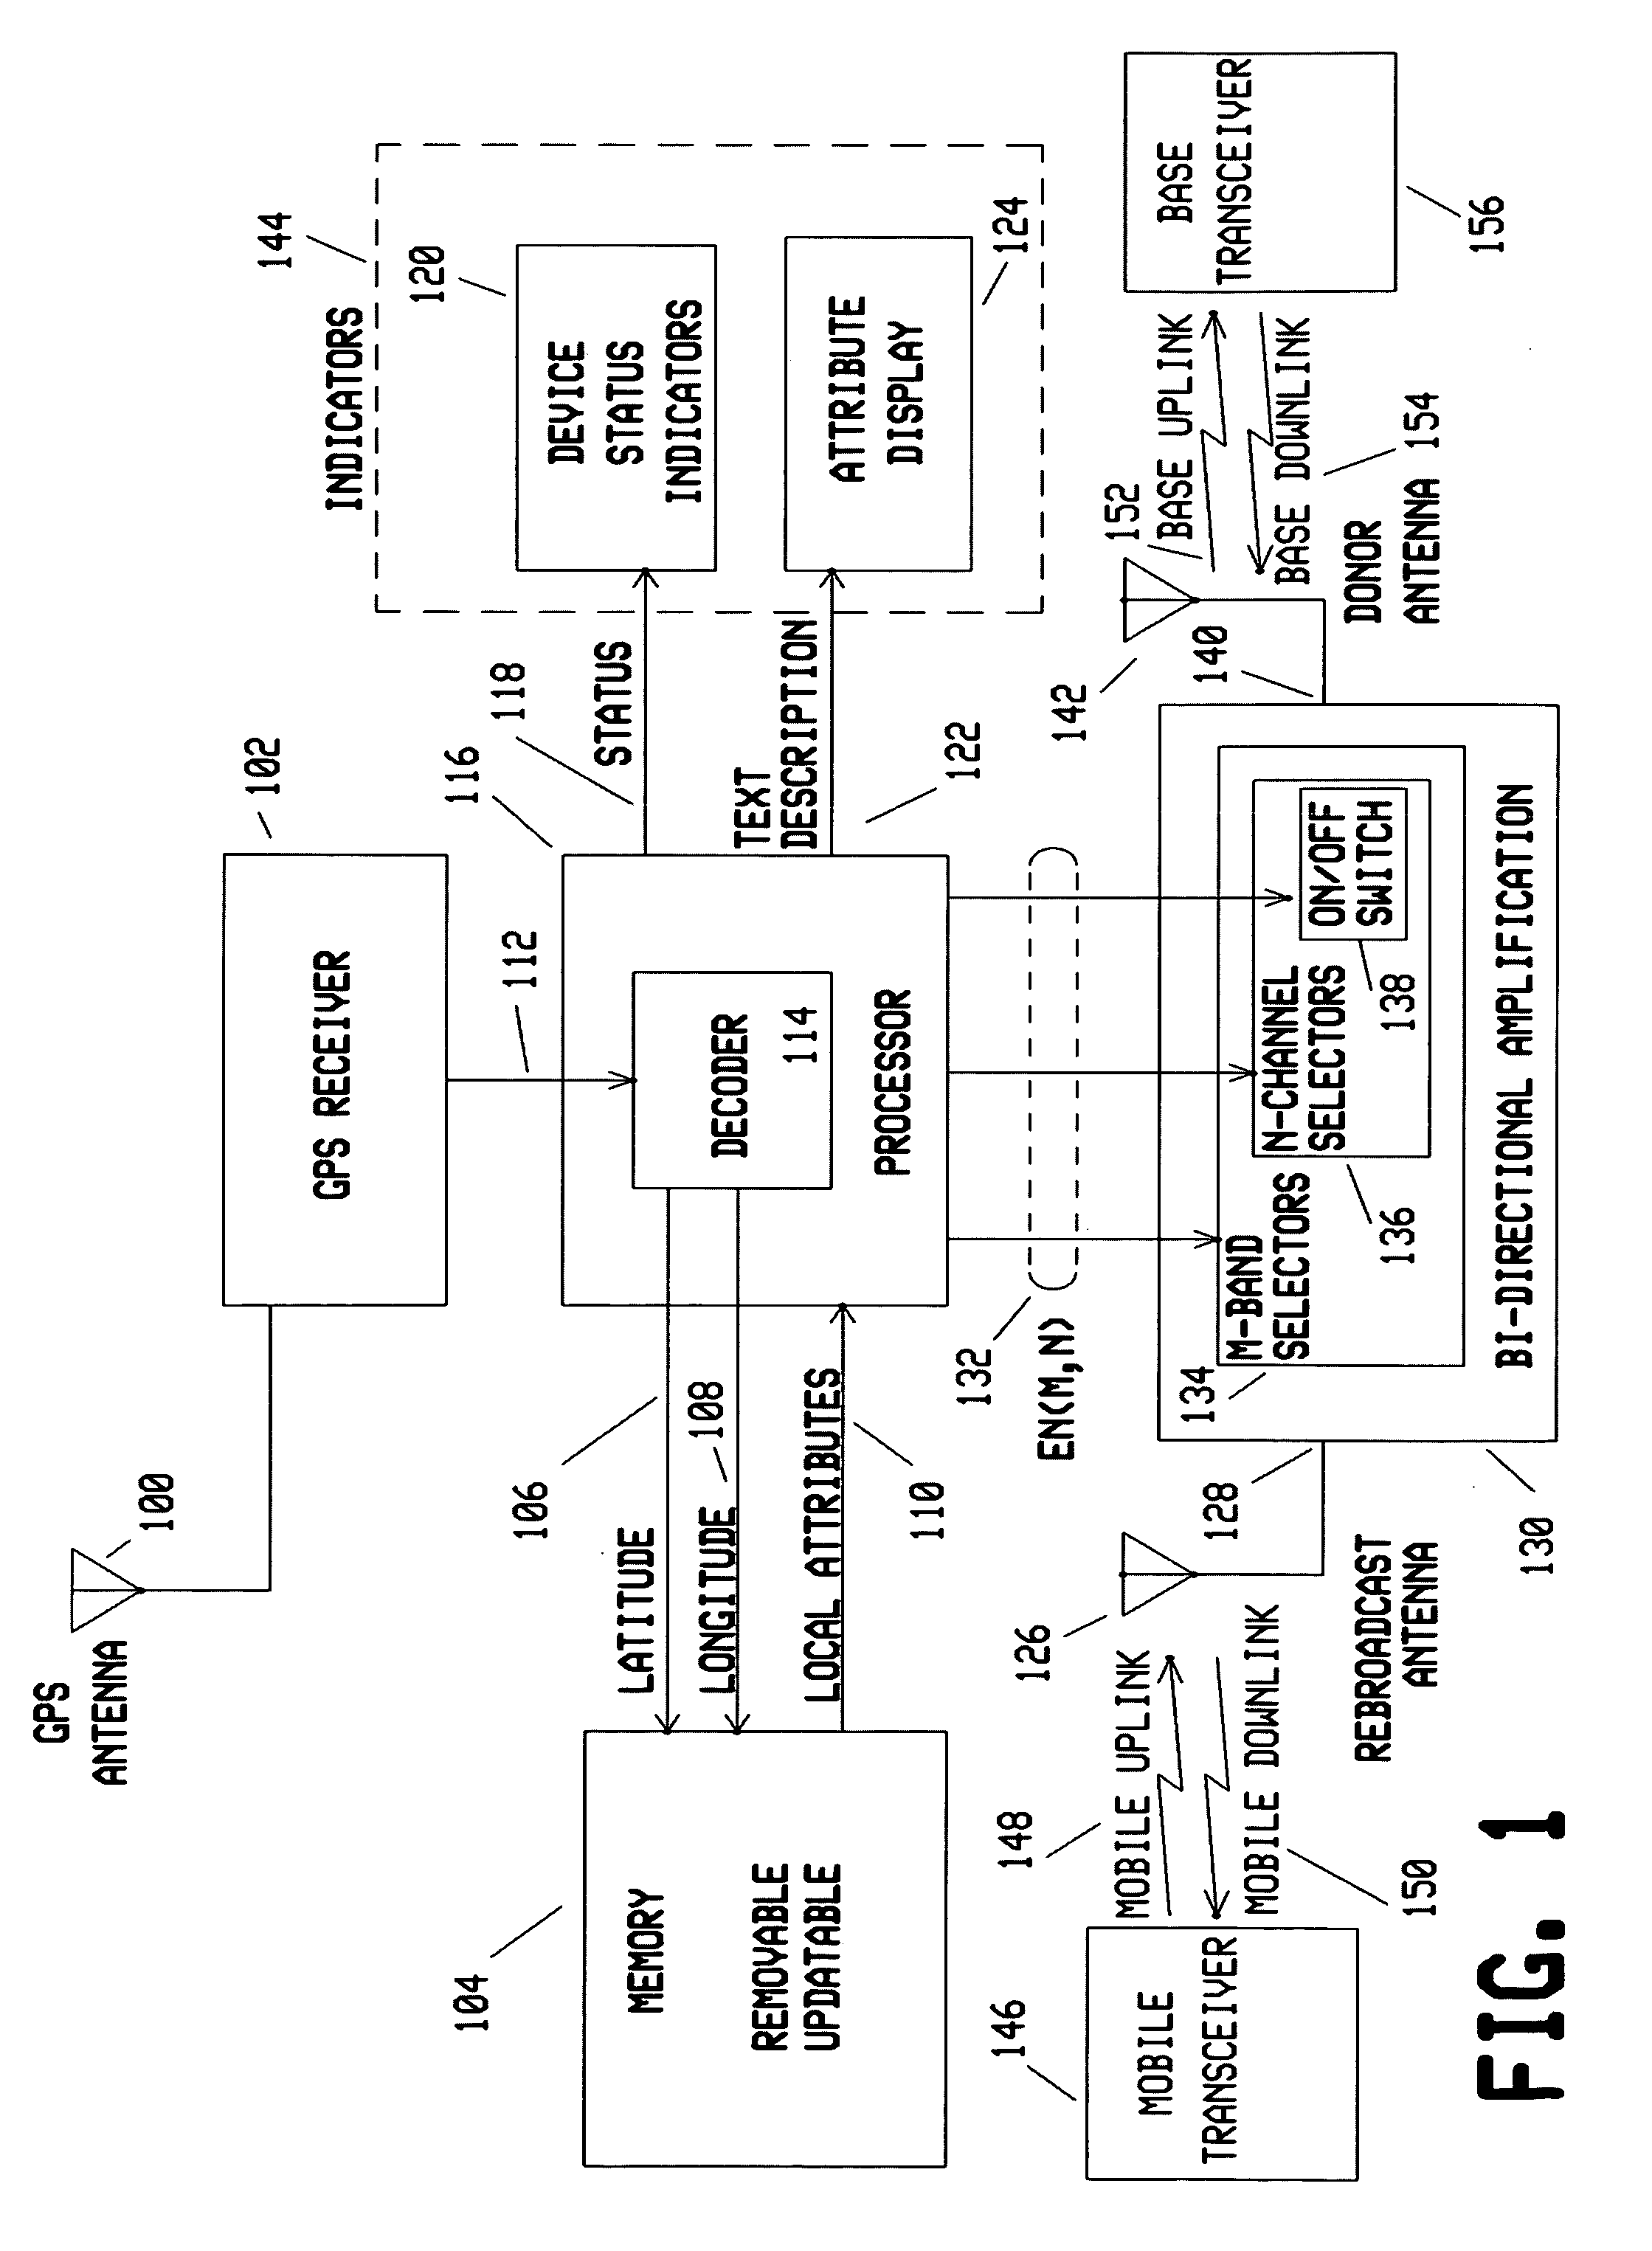 Multi-band, multi-channel, location-aware communications booster